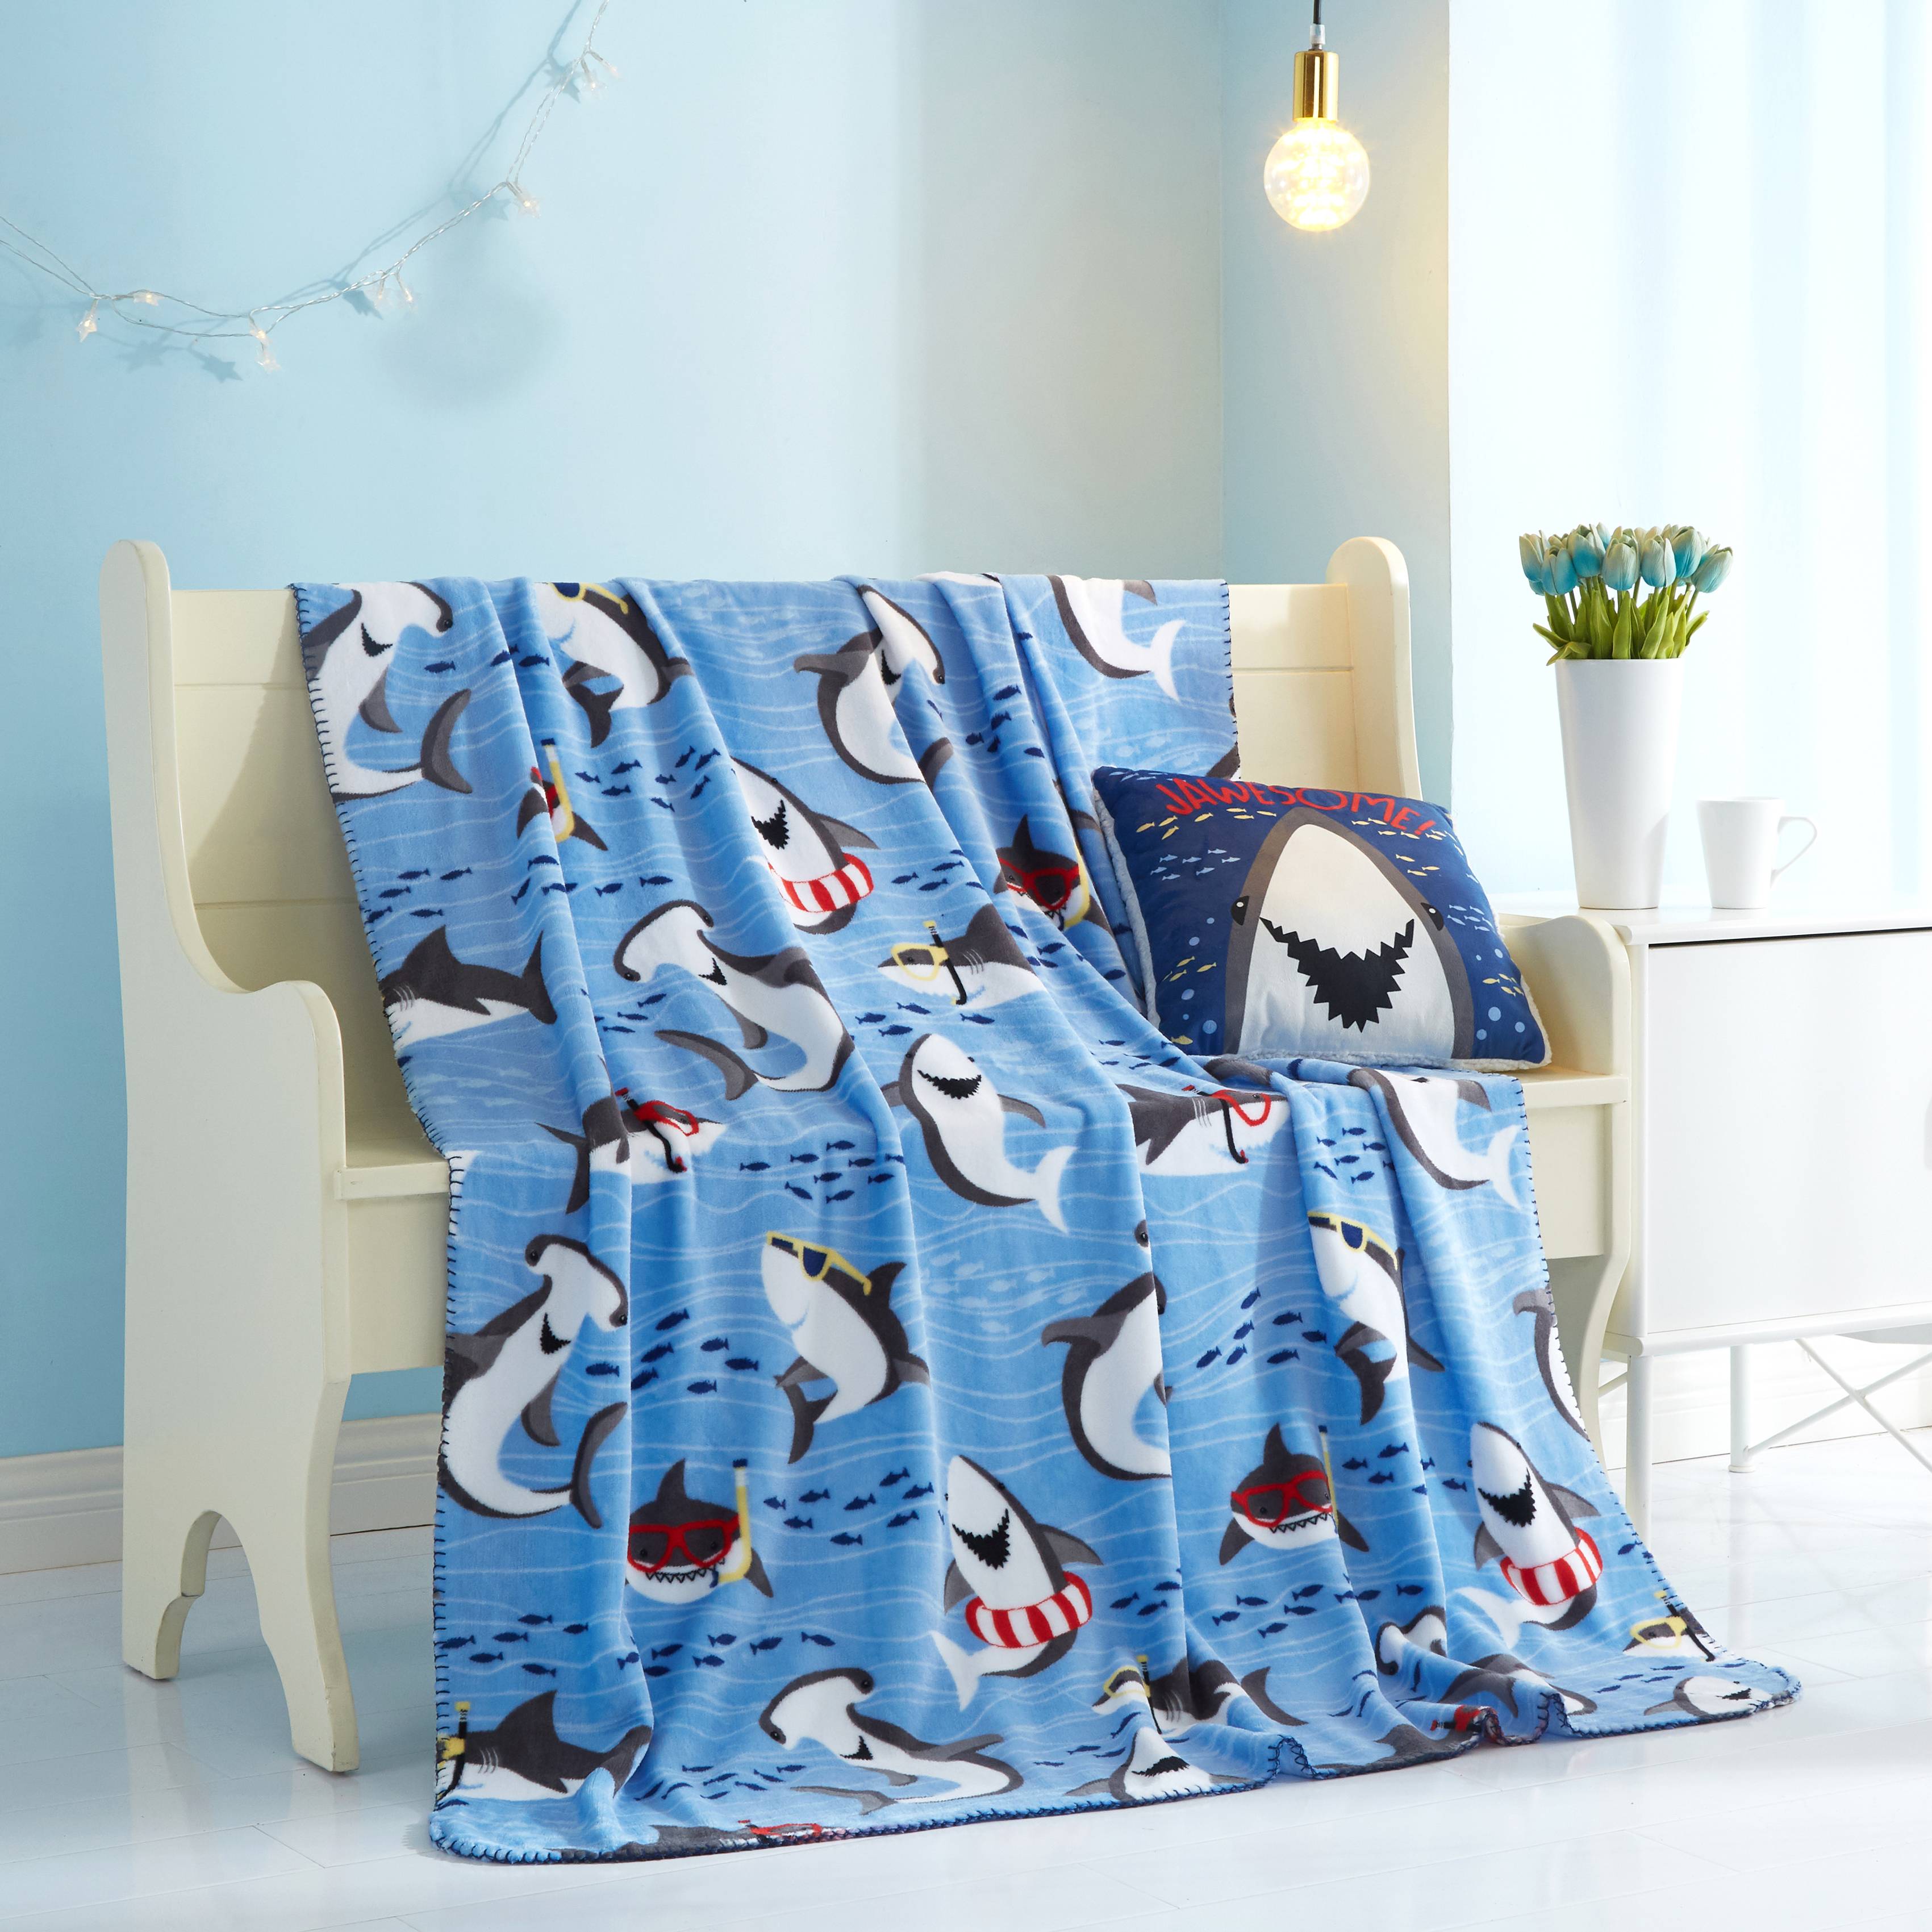 Your Zone Kids Soft 50" x 60" Plush Throw, Blue, Polyester - image 1 of 5